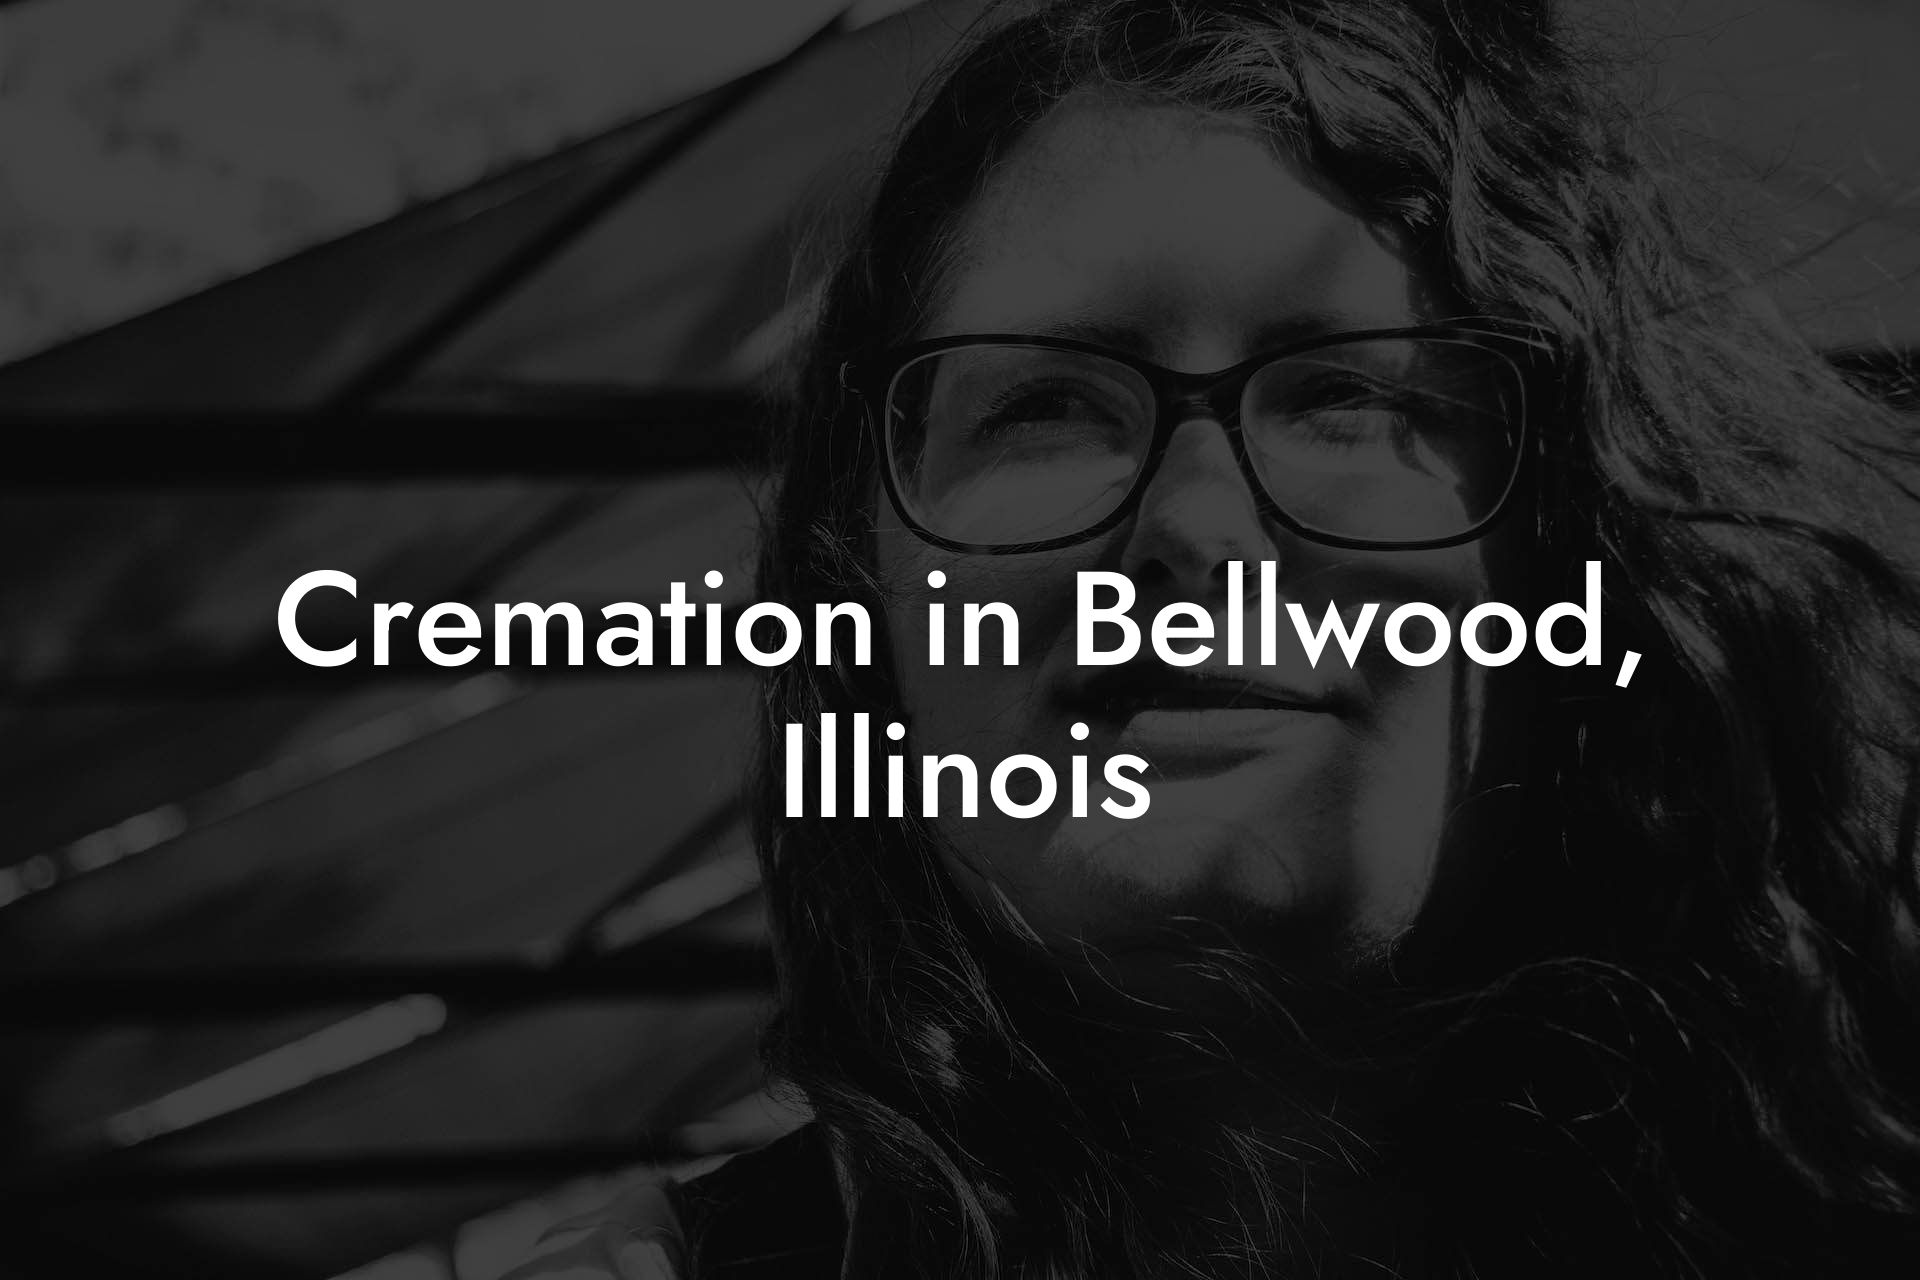 Cremation in Bellwood, Illinois